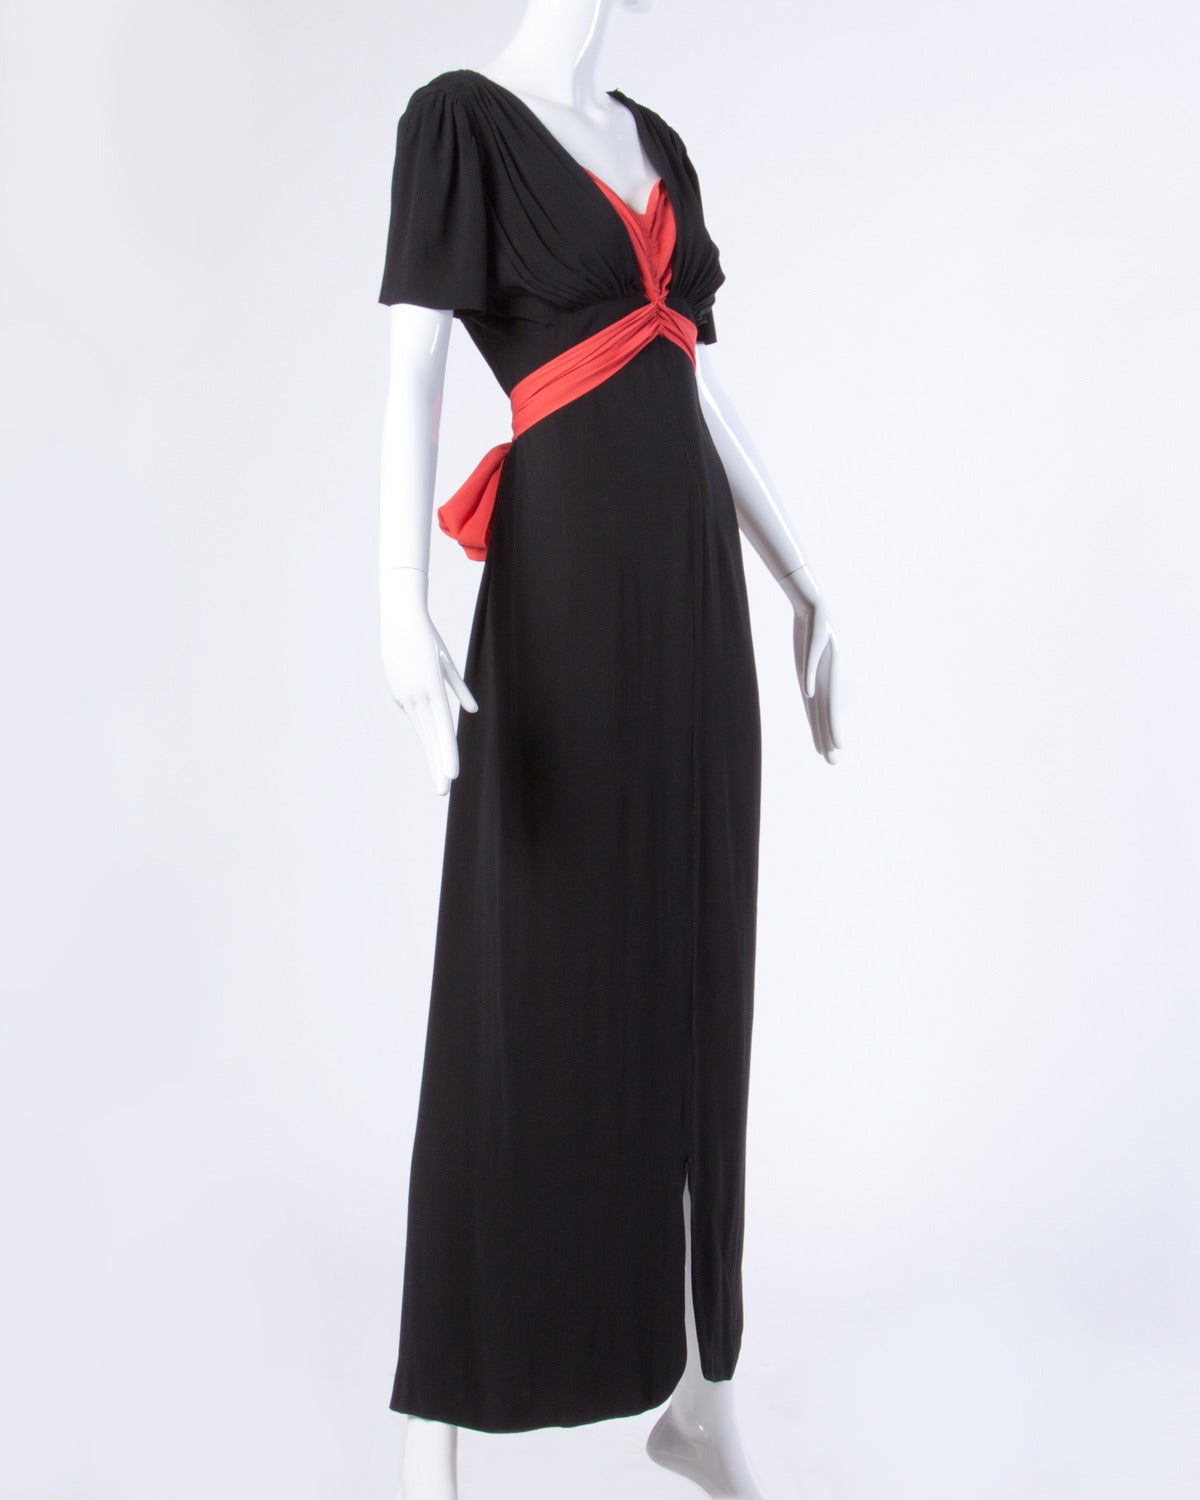 Gorgeous vintage black and coral gown with an empire waist and short sleeves. Classy and elegant.

Details:

Partially Lined
Side Metal Zip and Snap Closure
Estimated Size: XS-M
Marked Size: Not Marked
Color: Coral/ Black
Fabric: